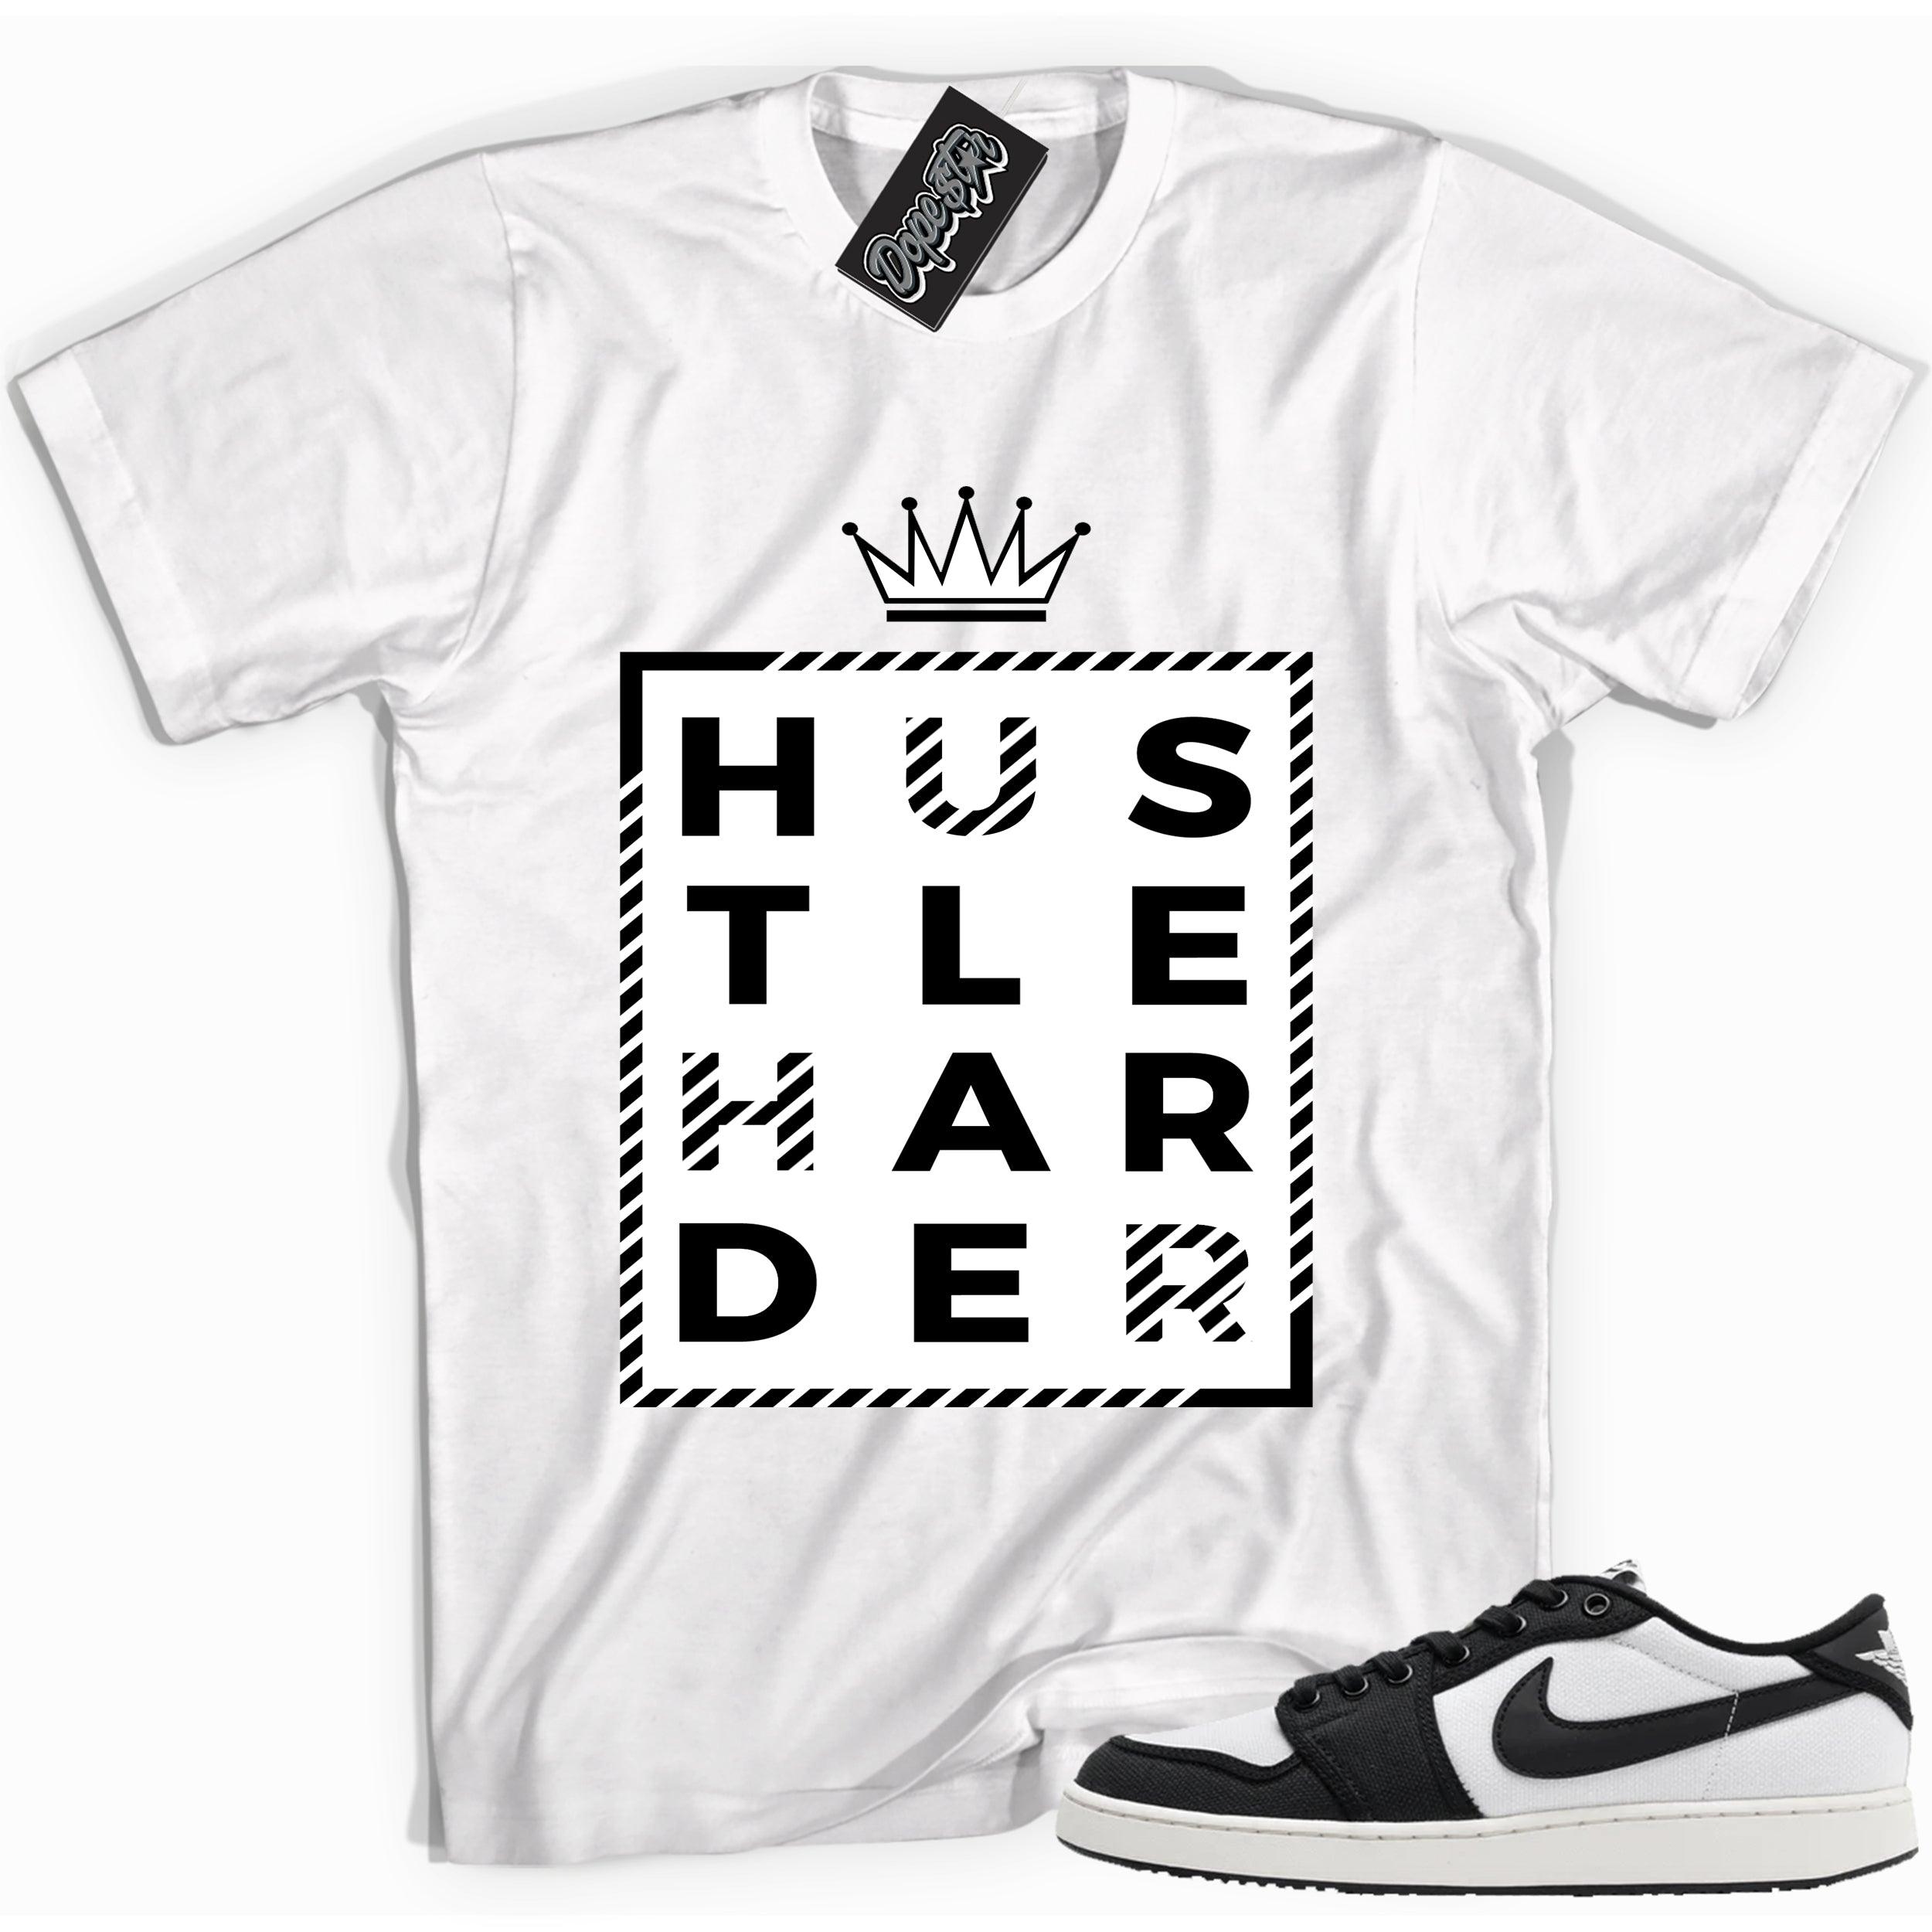 Cool white graphic tee with 'hustle harder' print, that perfectly matches Air Jordan 1 Retro Ajko Low Black & White sneakers.